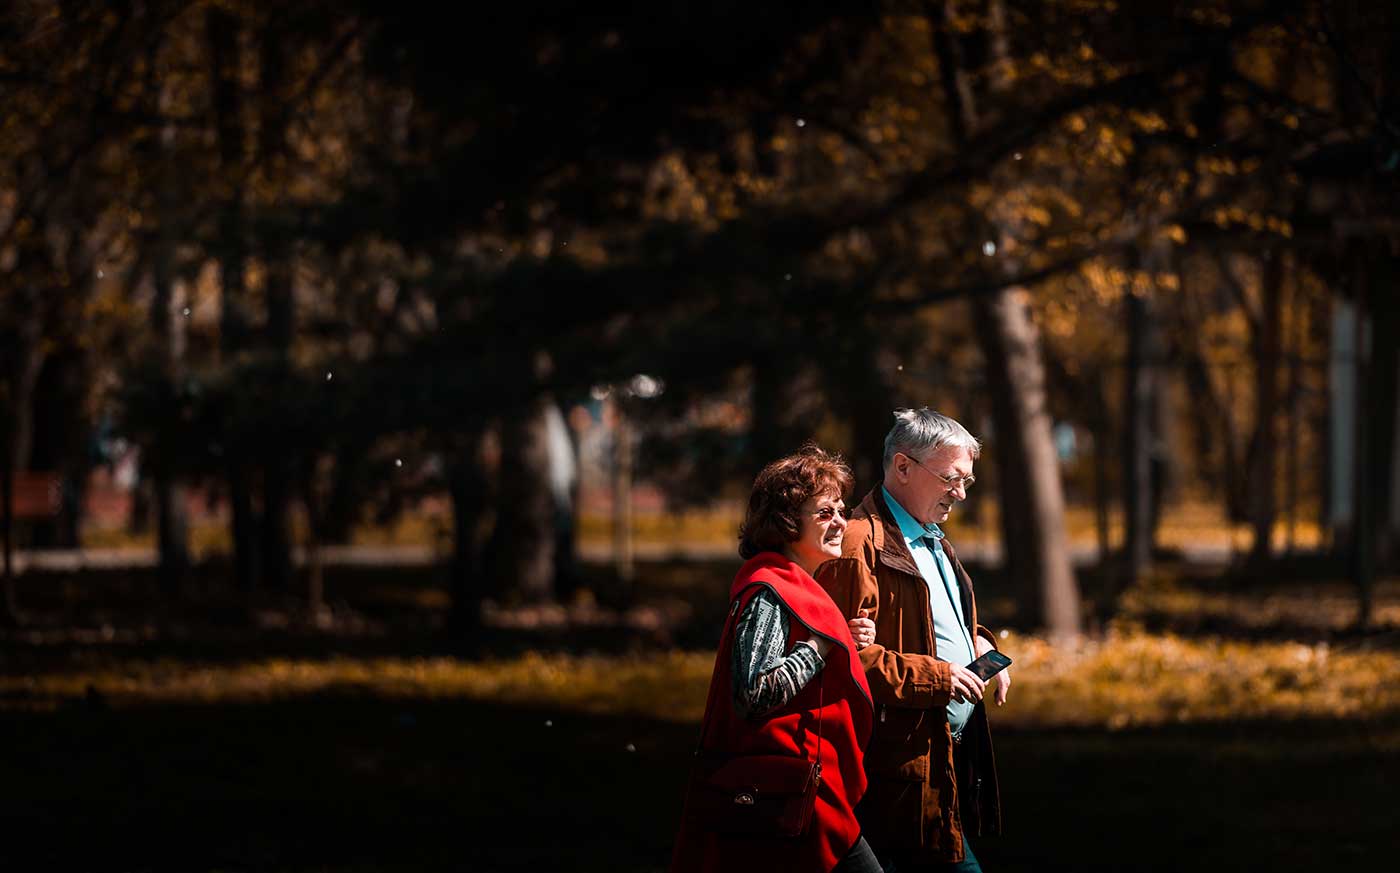 Over 50's dating: couple taking a walk in a park.